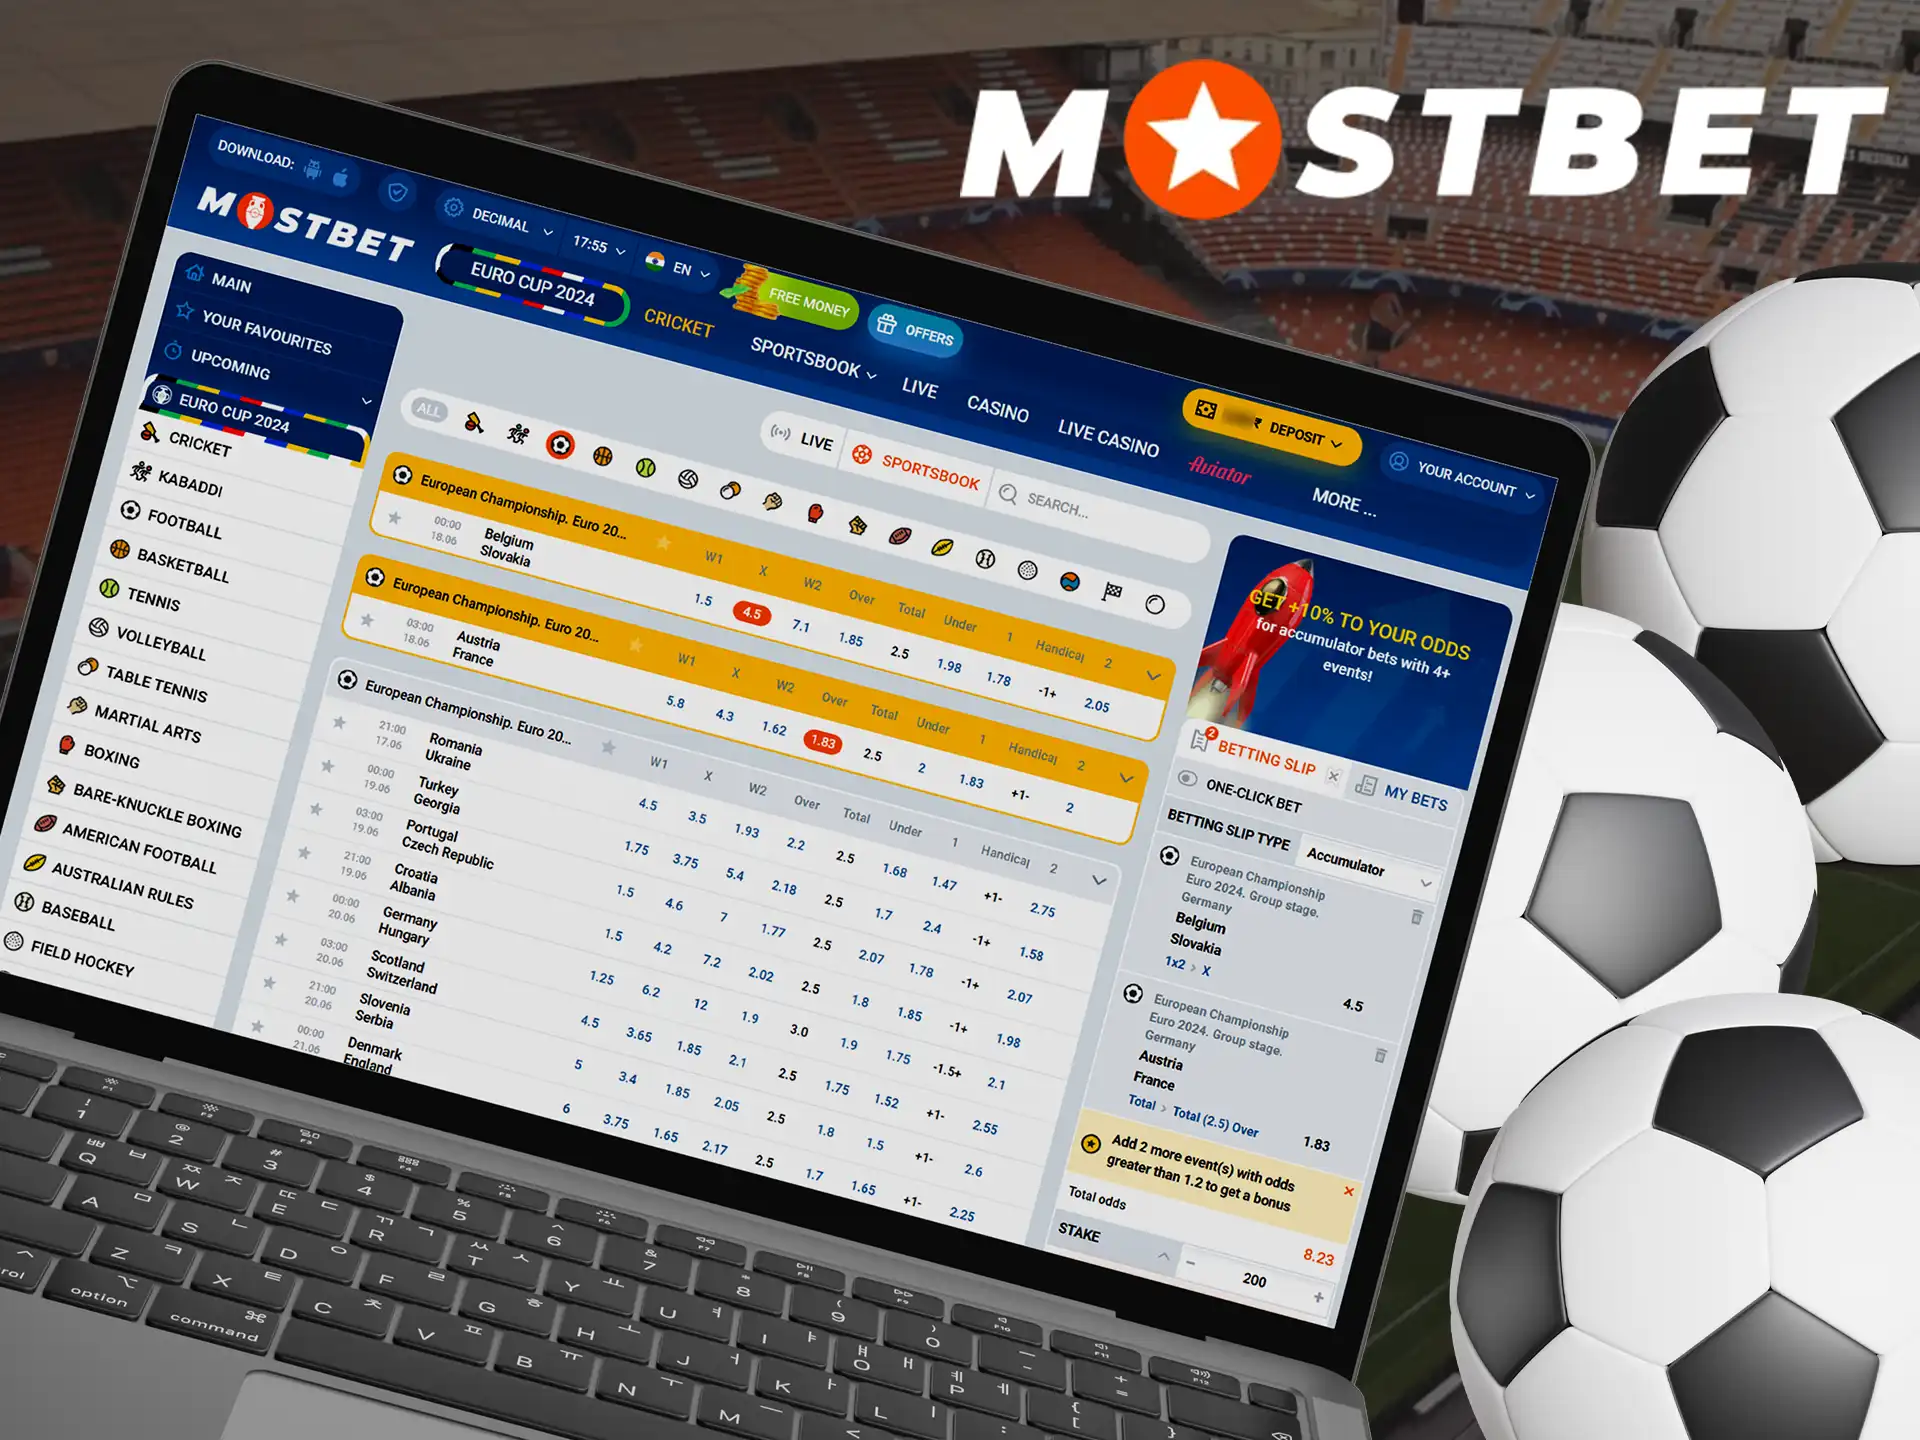 Choose an event and place a bet at Mostbet.